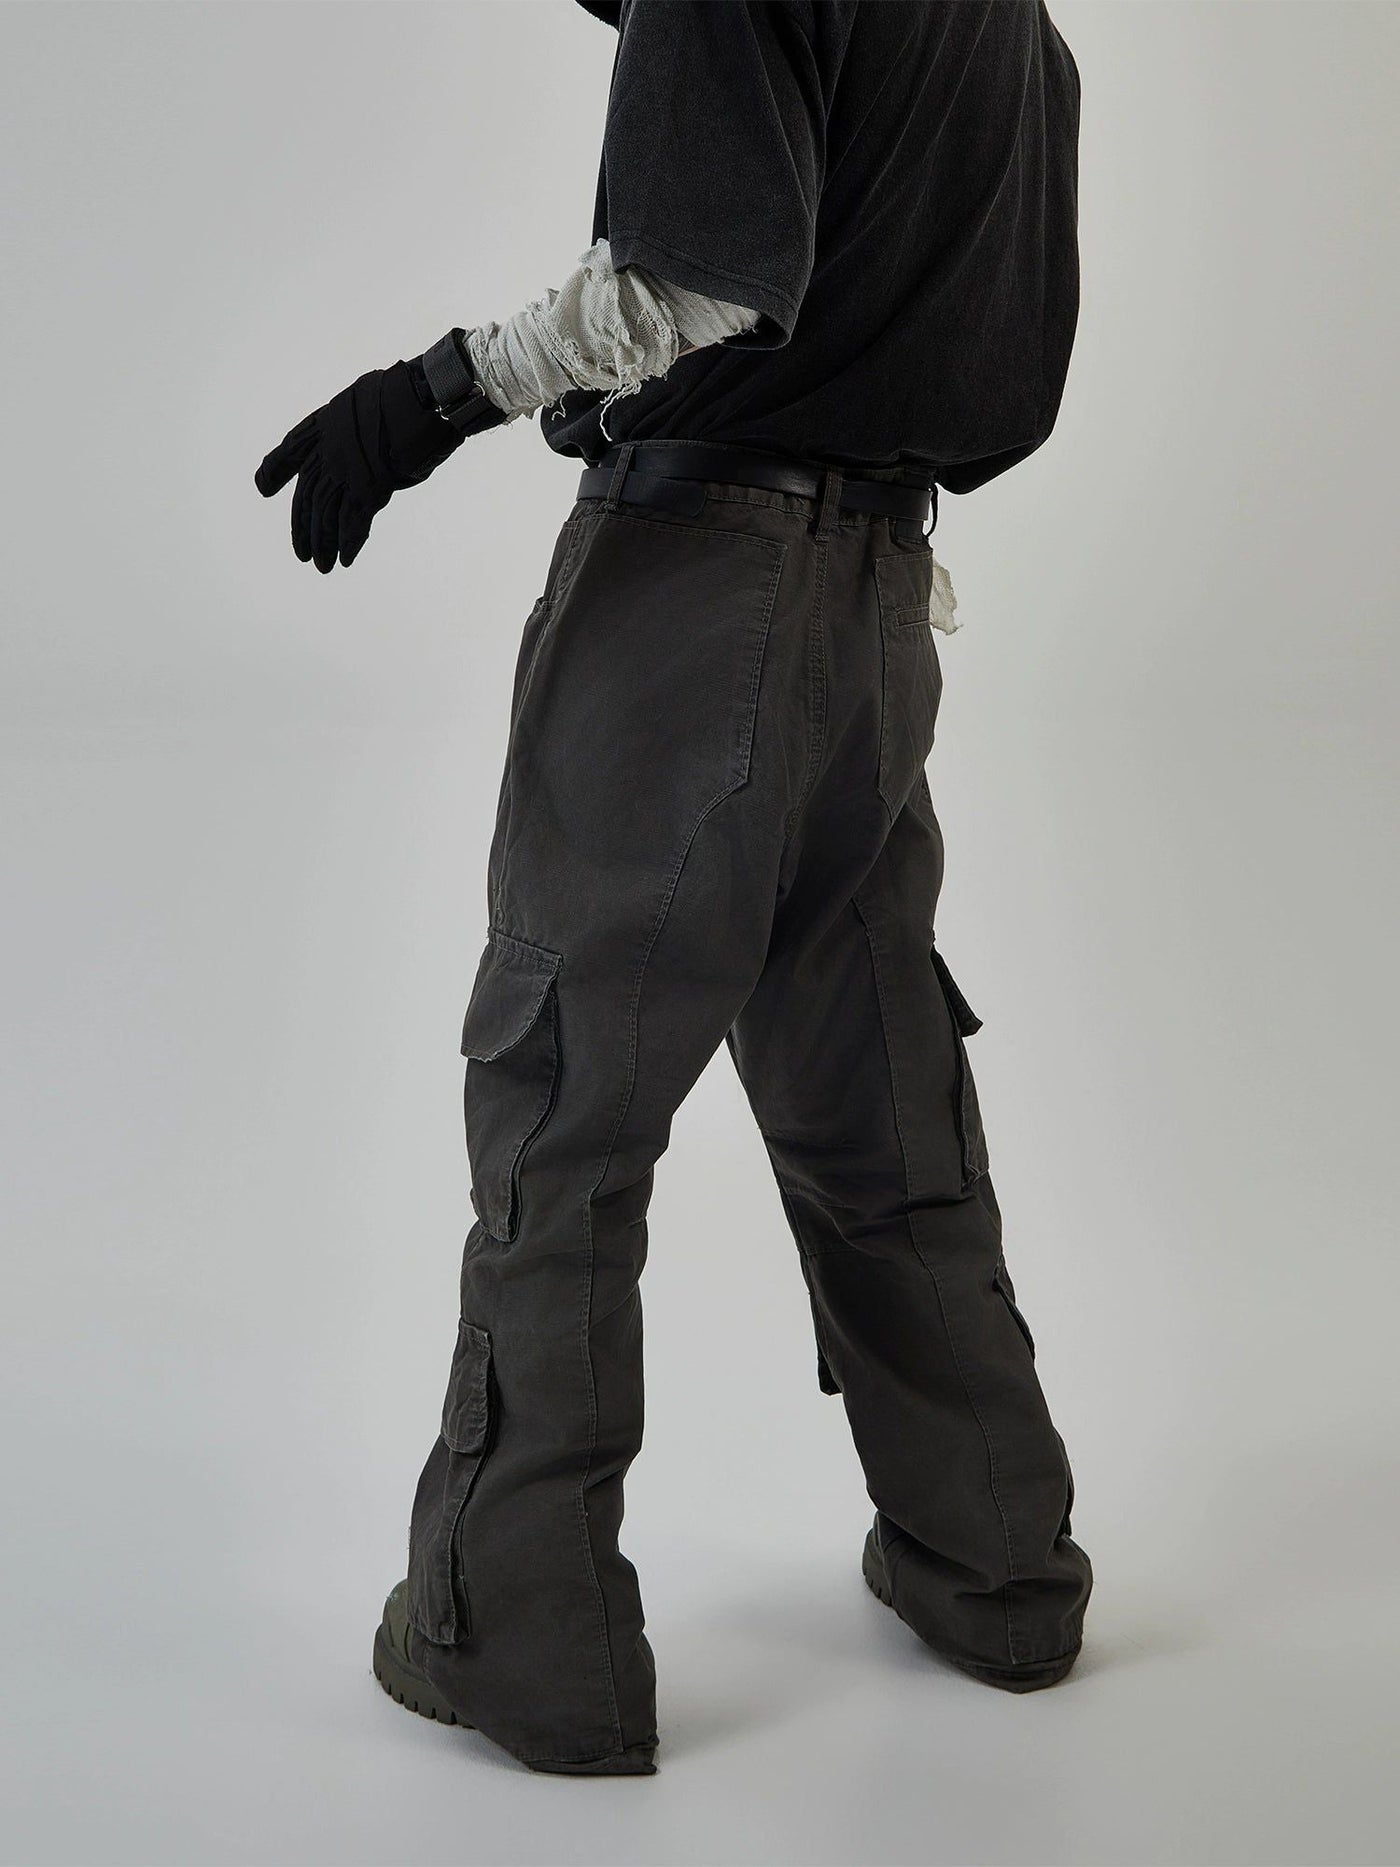 Solid Heavy Washed Cargo Pants Korean Street Fashion Pants By Ash Dark Shop Online at OH Vault